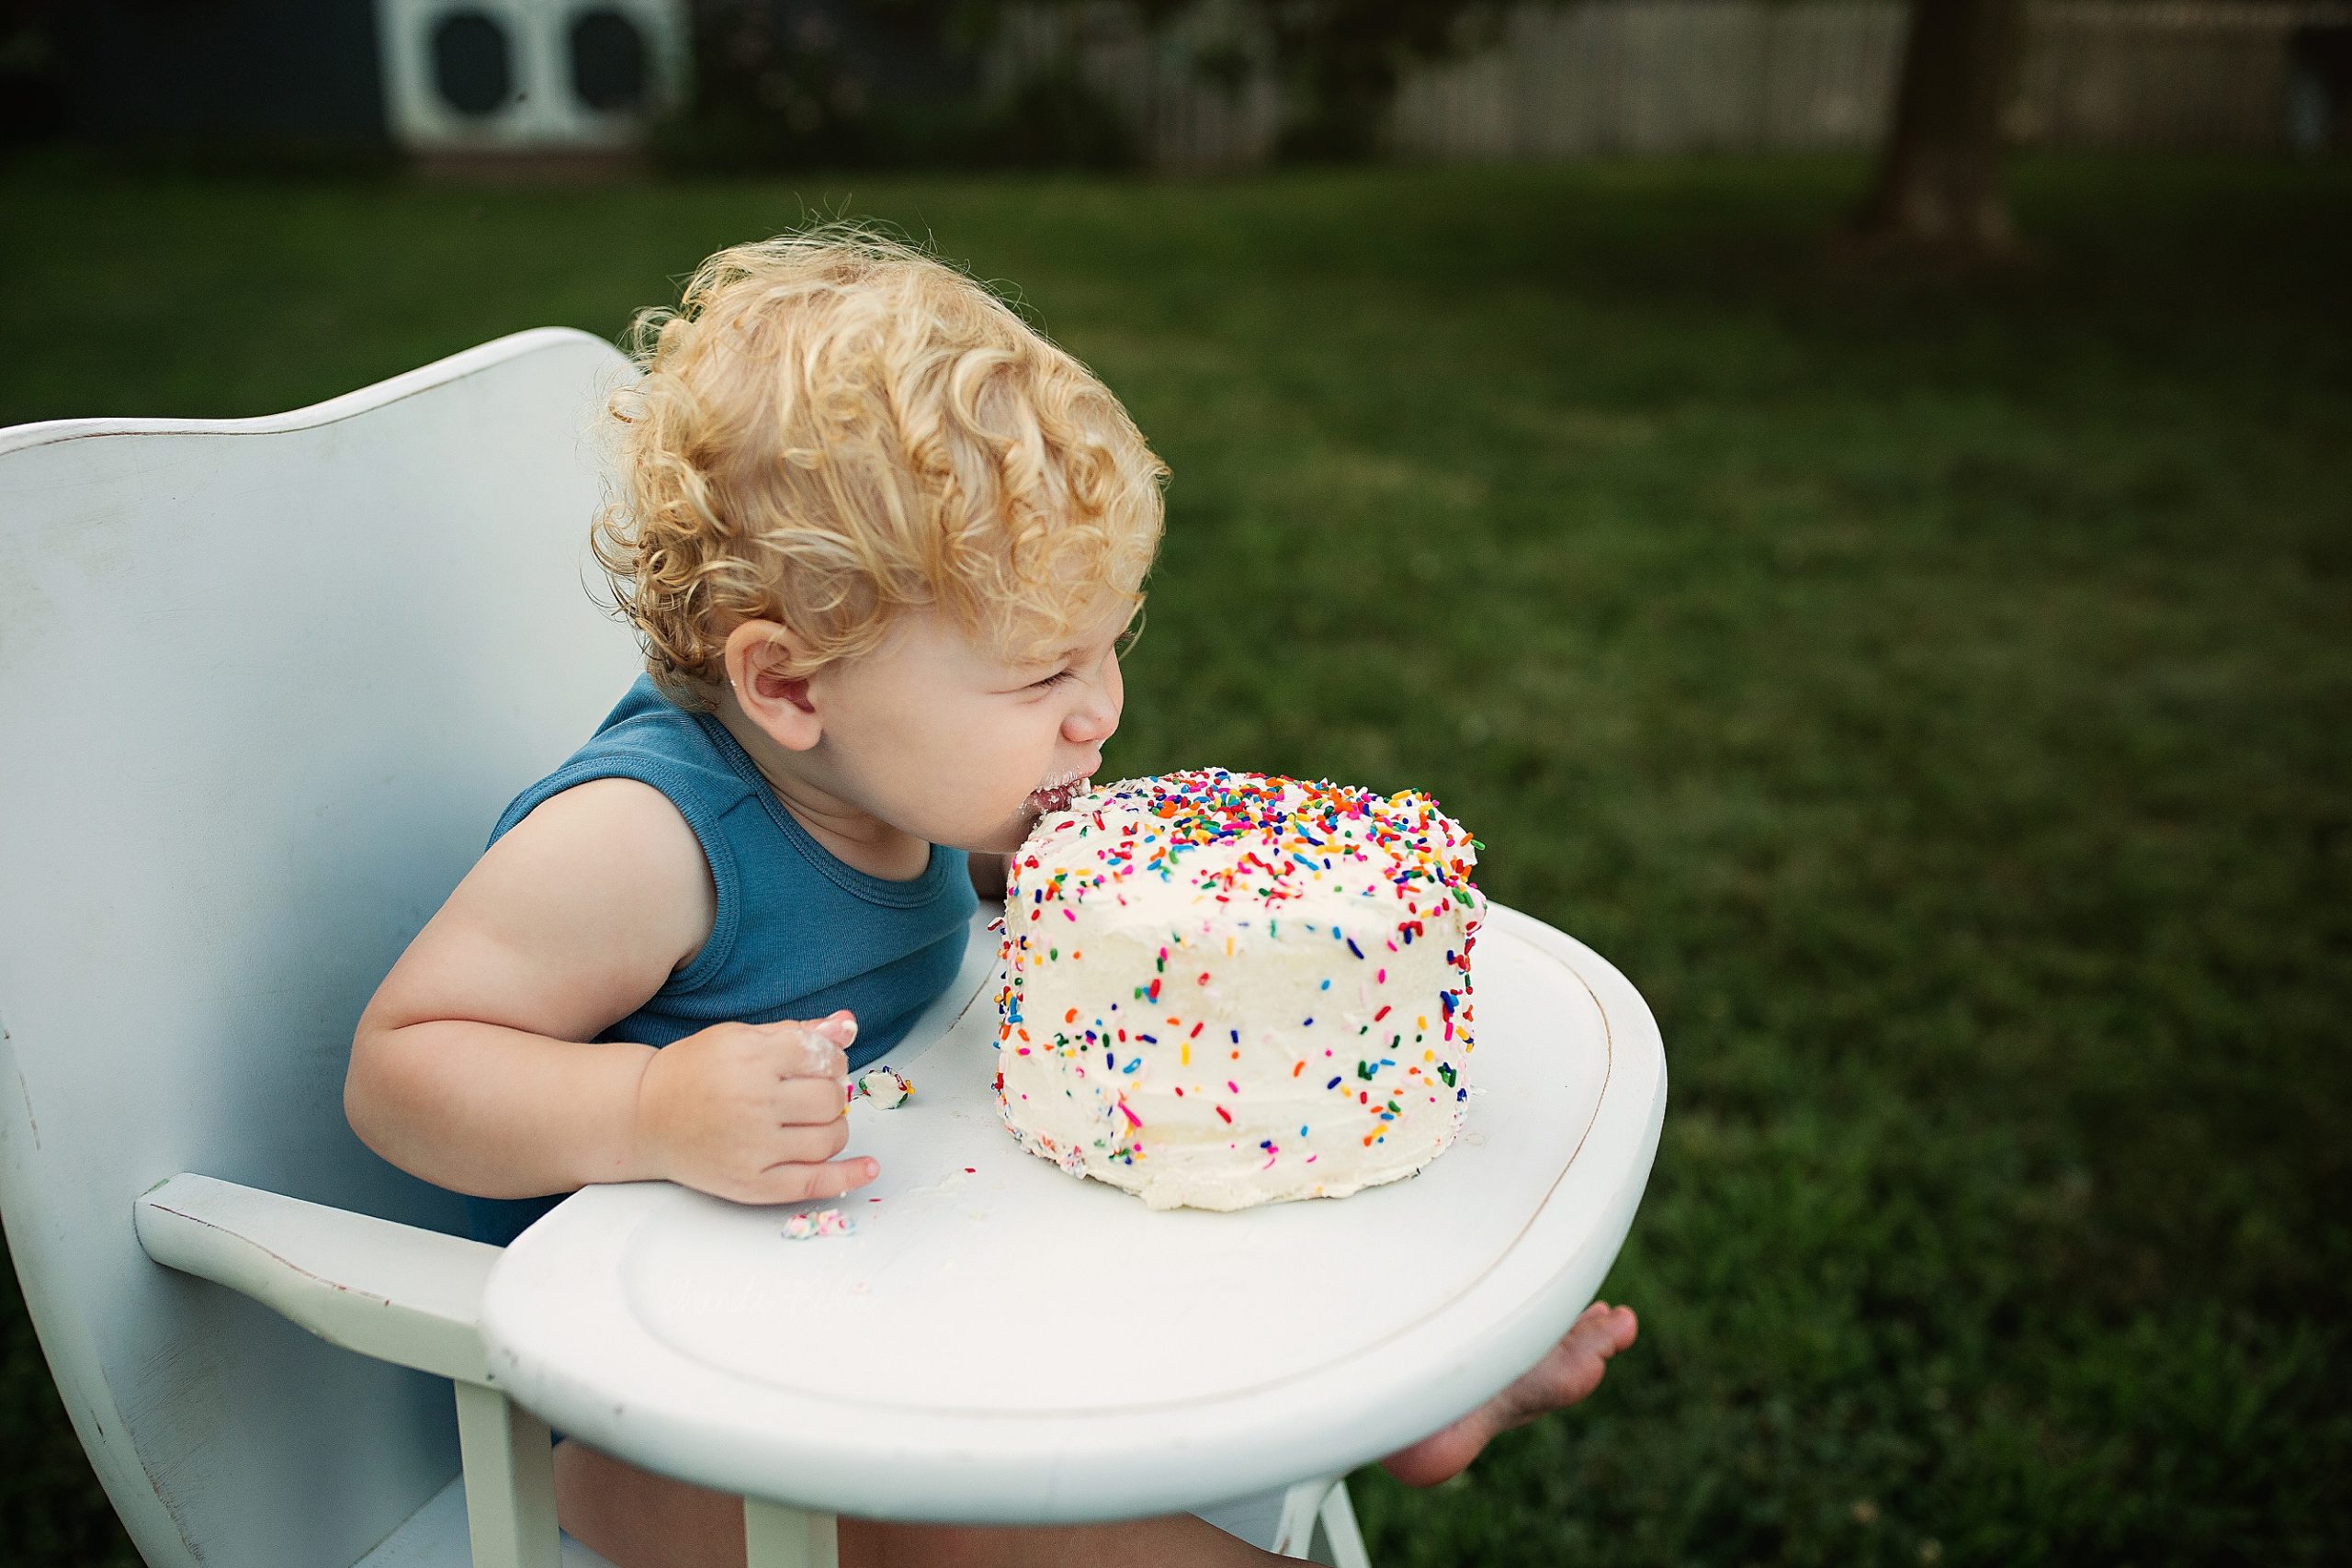 Outdoor Cake Smash with Sprinkle Cake and High Chair | Peoria IL Cake Smash Washington IL 1 Year Photographer